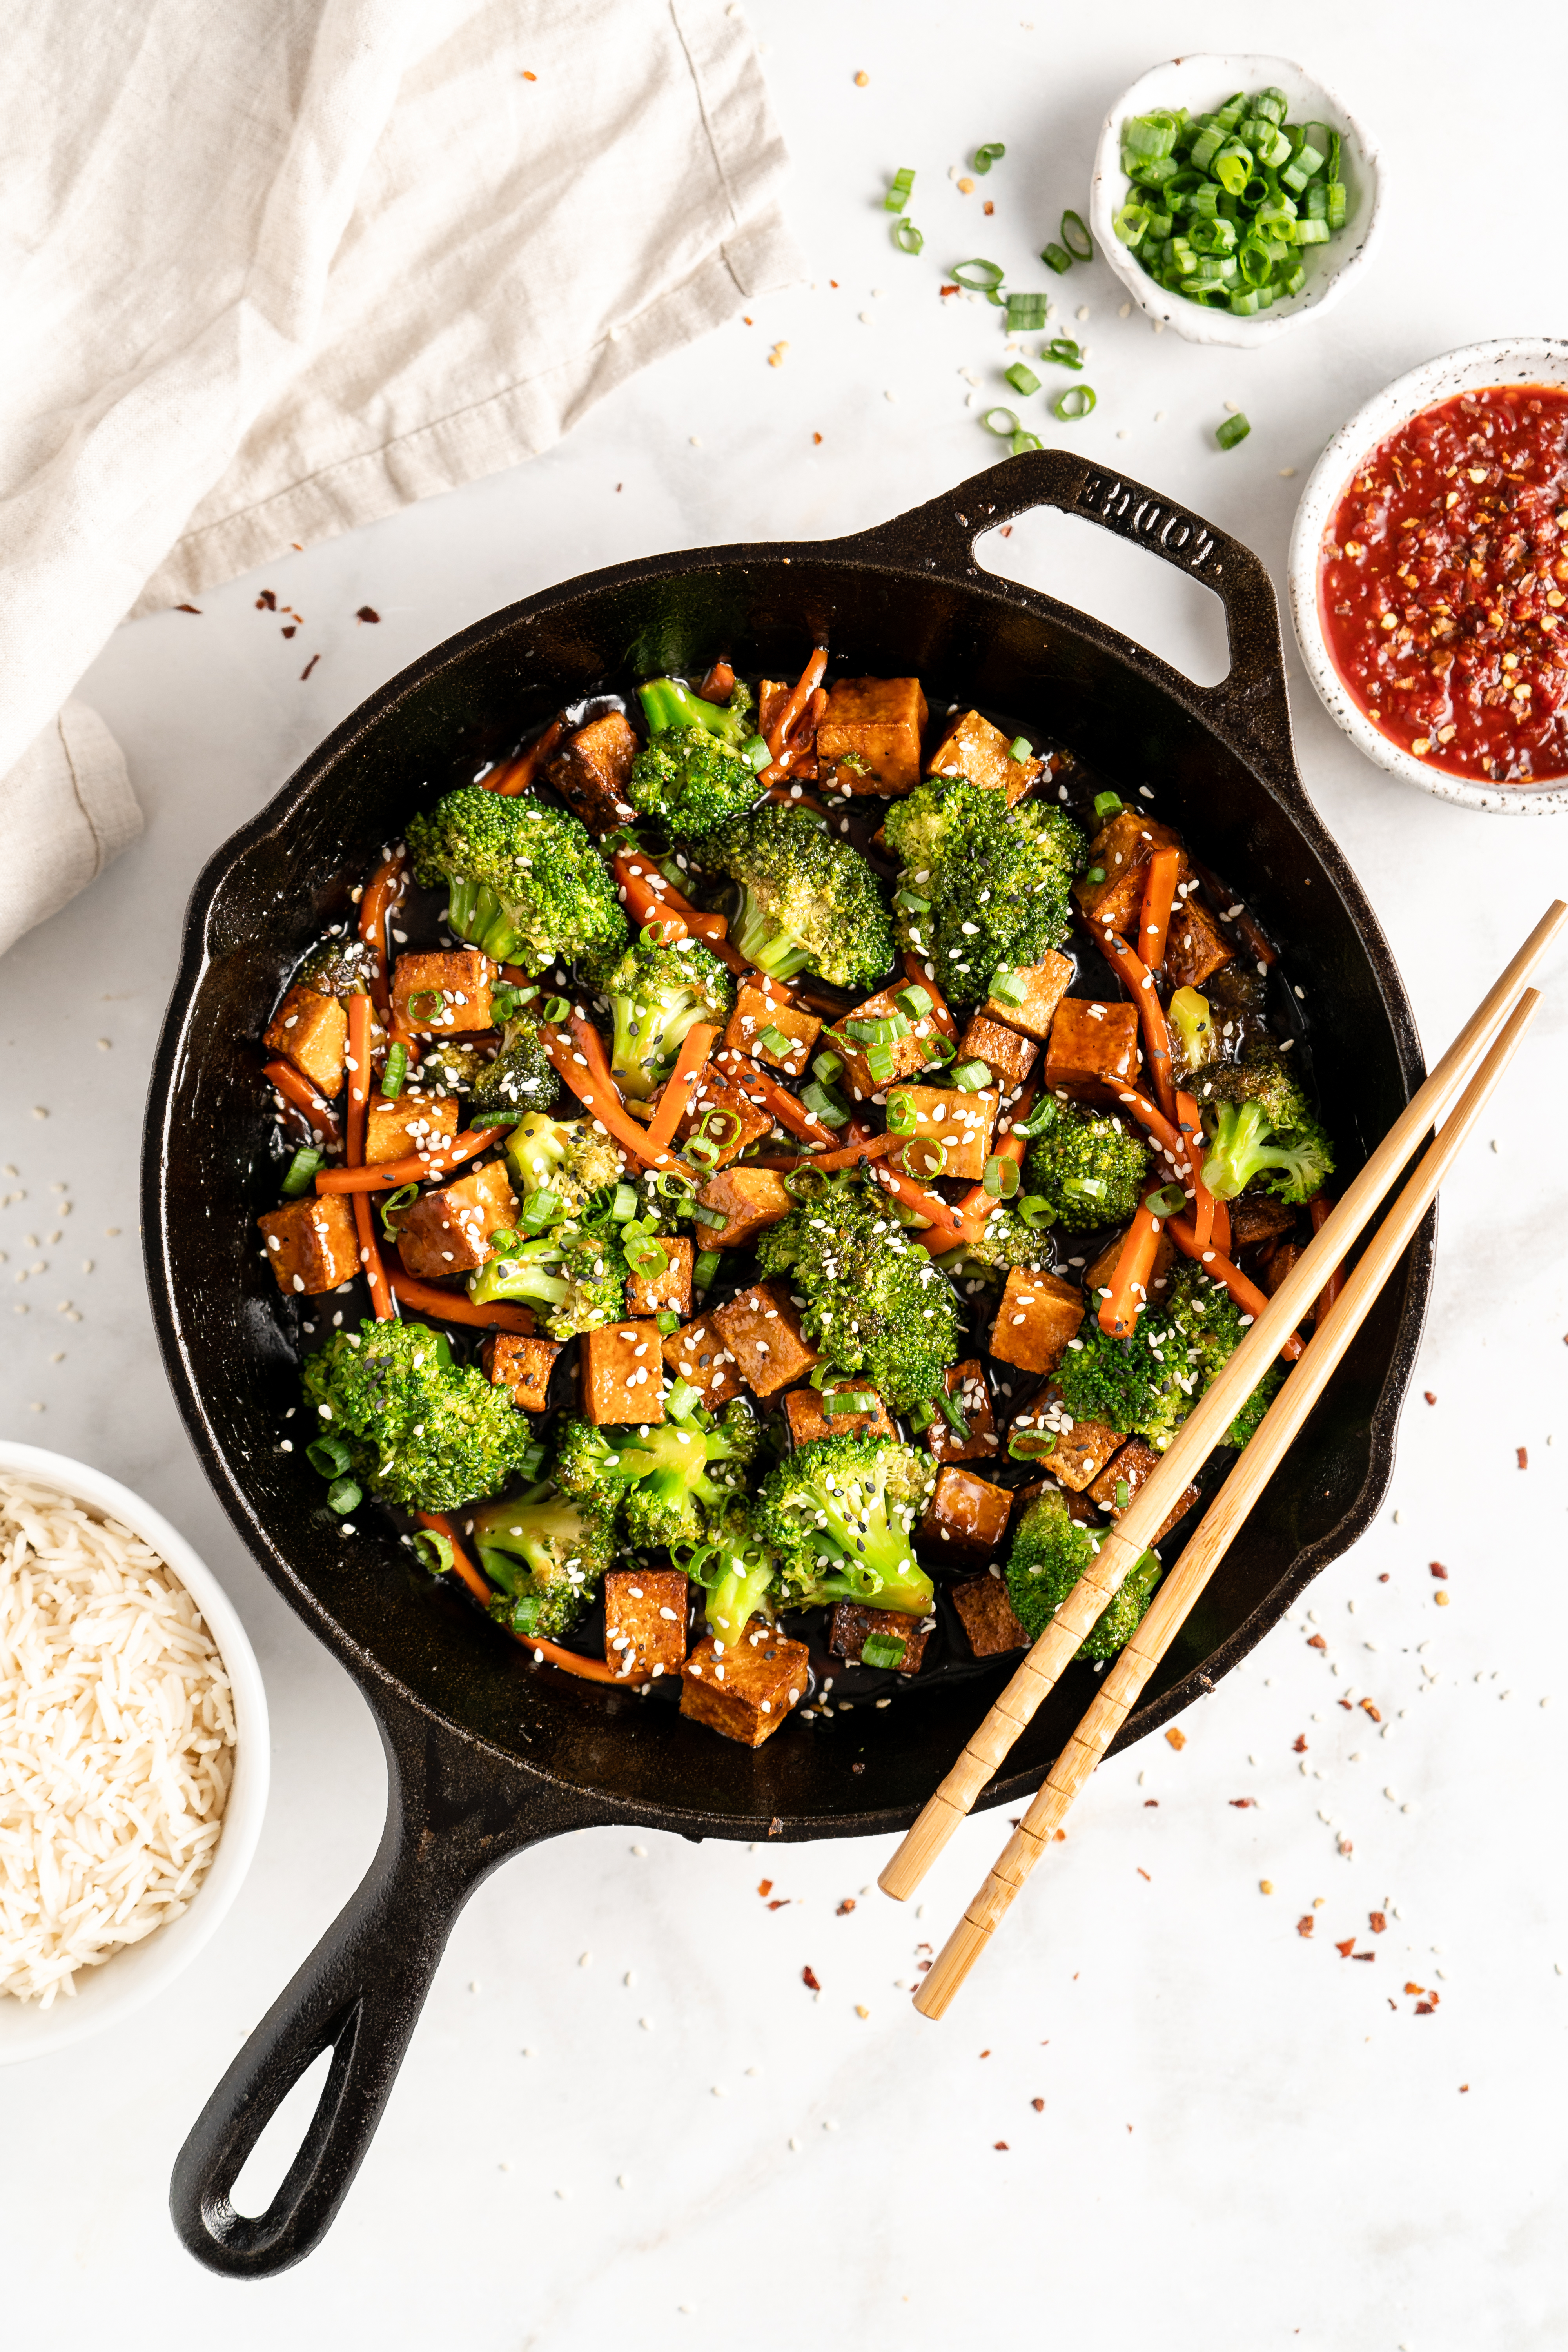 Overhead view of tofu and veggie stir fry in cast iron skillet with chopsticks